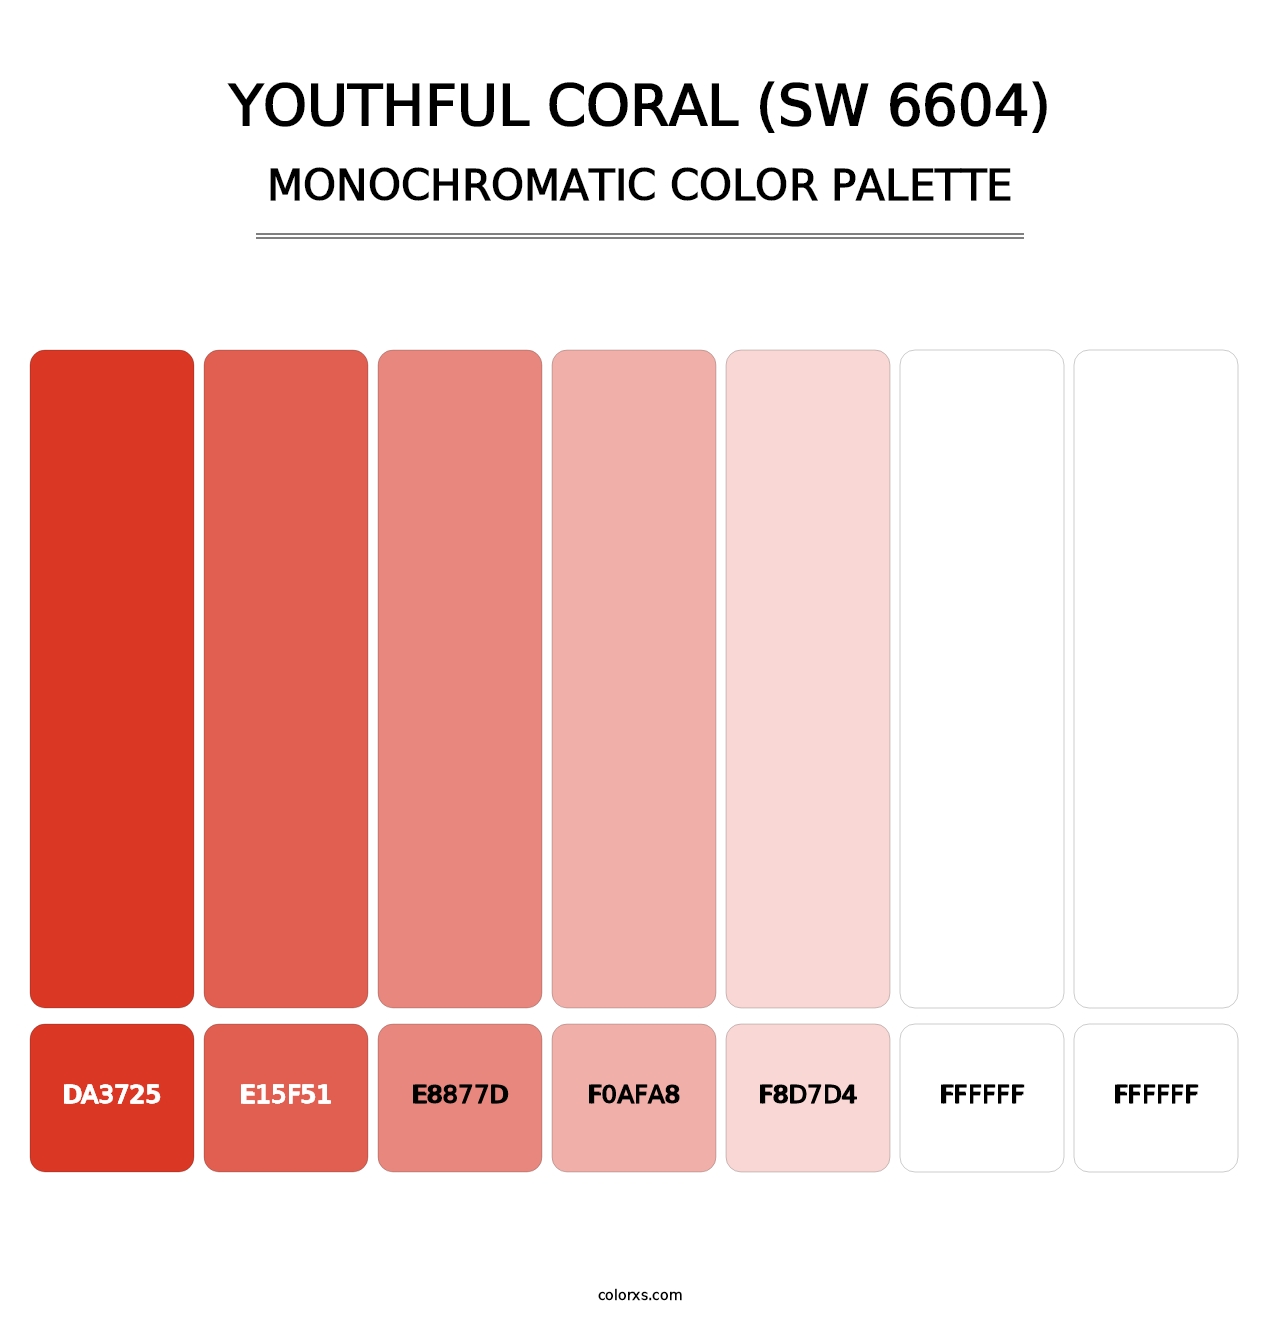 Youthful Coral (SW 6604) - Monochromatic Color Palette